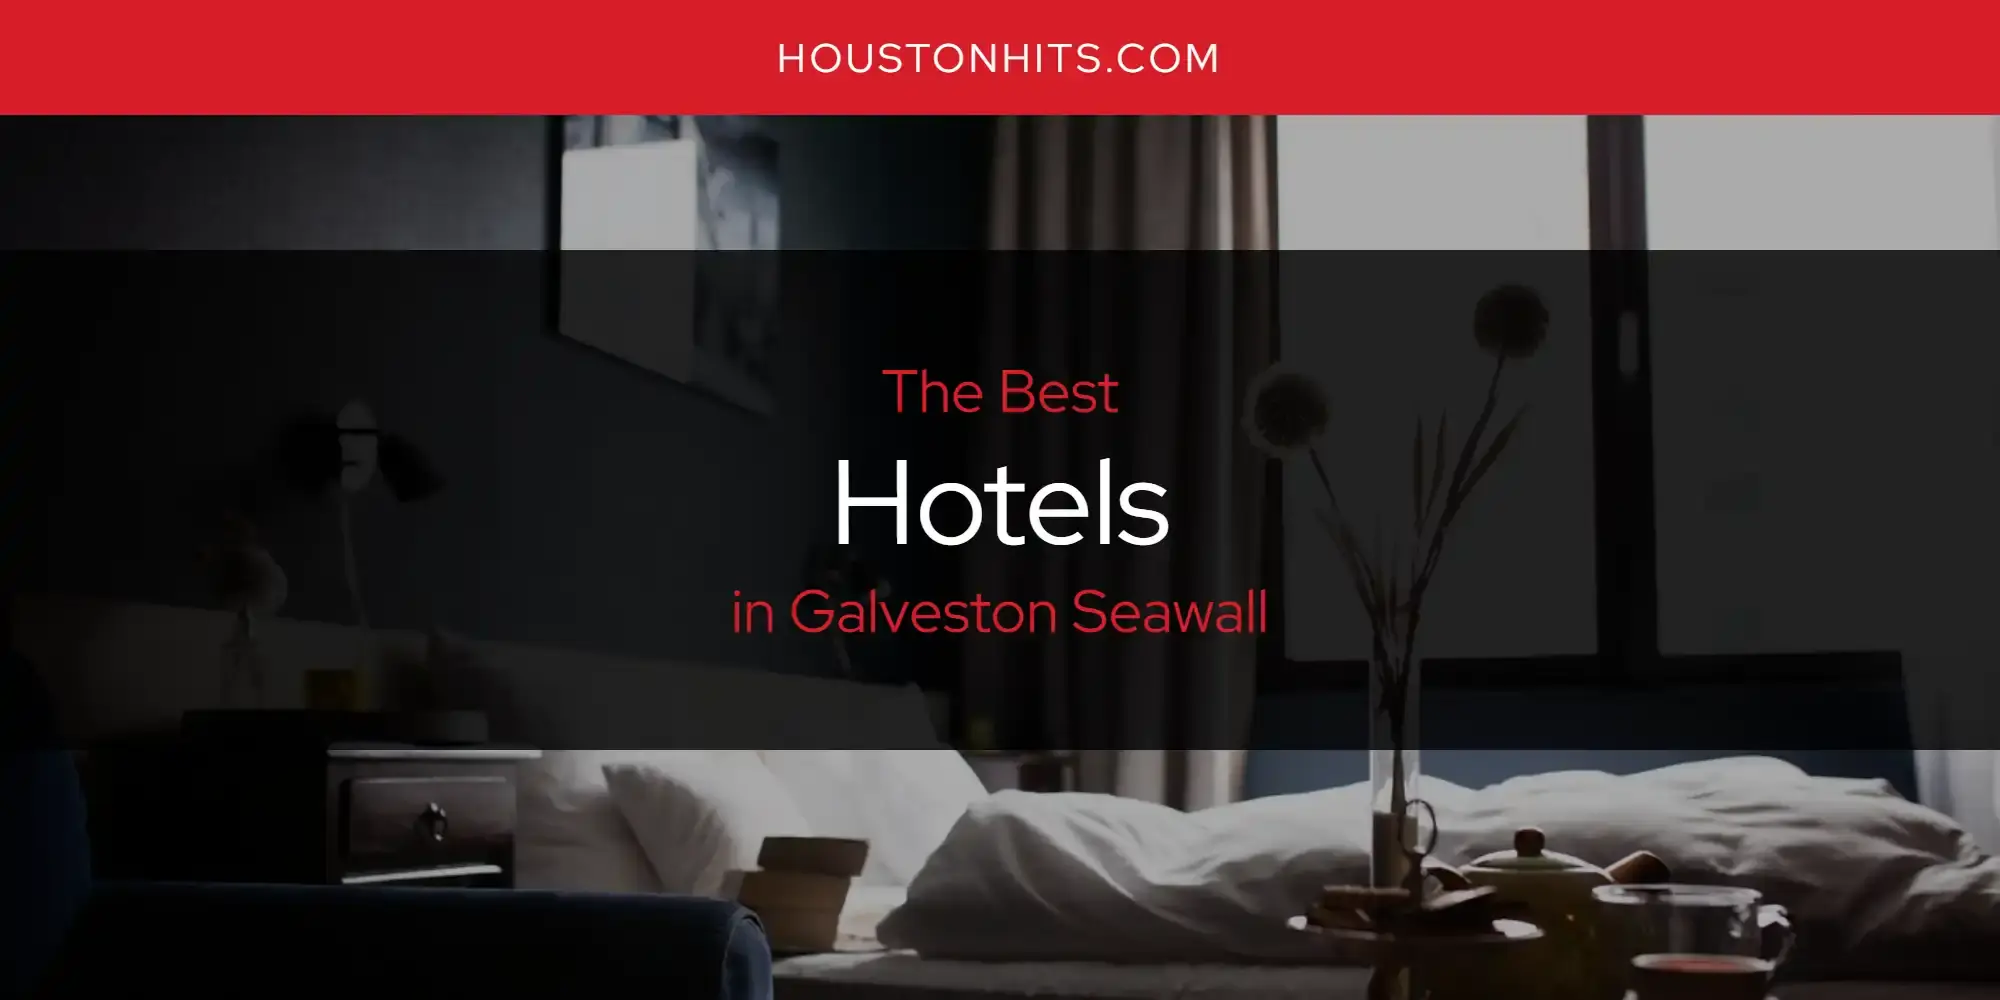 Best Hotels in Galveston Seawall? Here's the Top 17